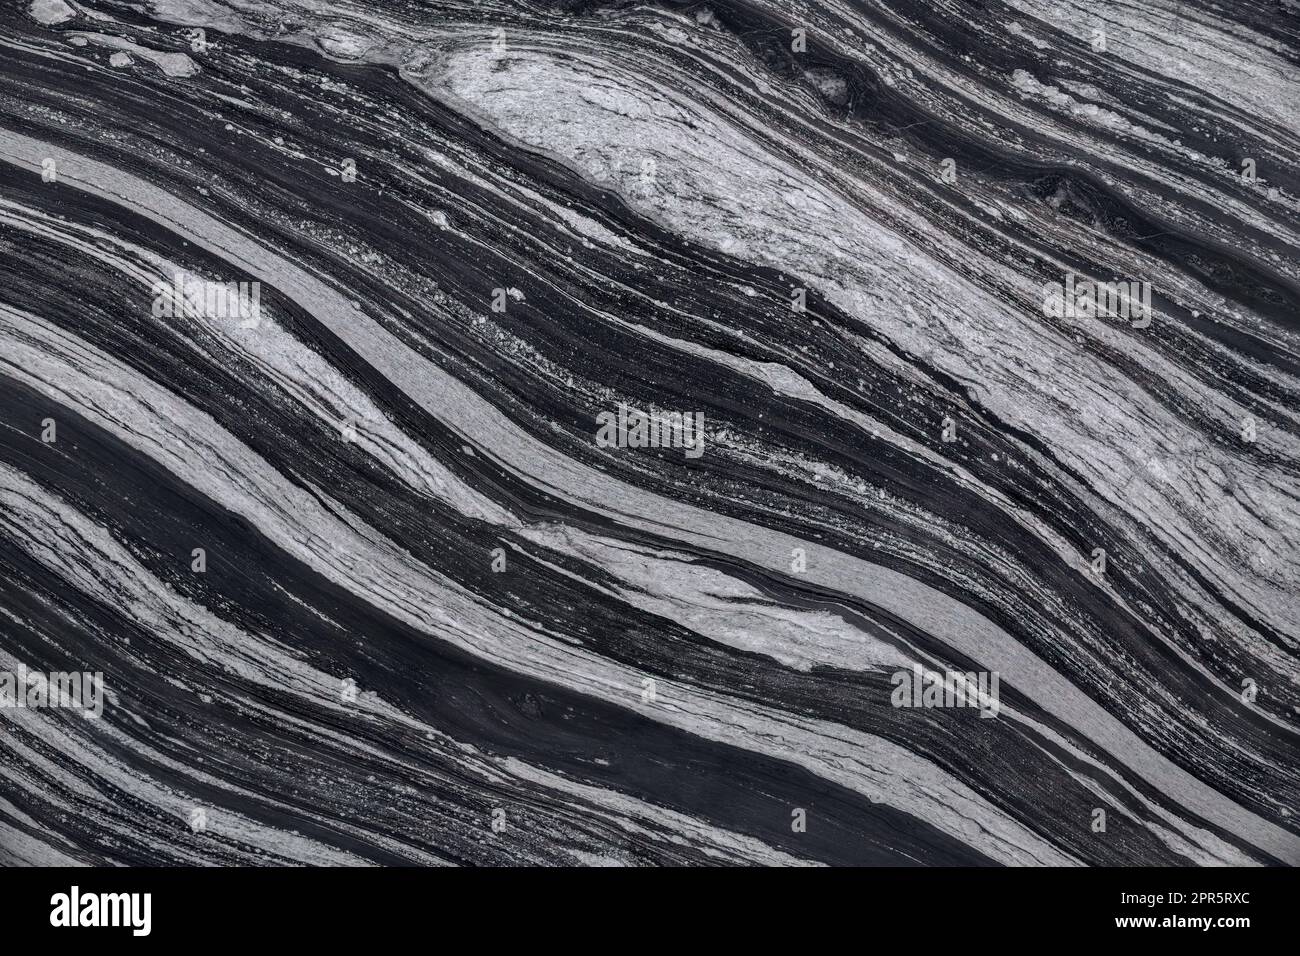 marble texture background black and white natural stone marbled granite Stock Photo